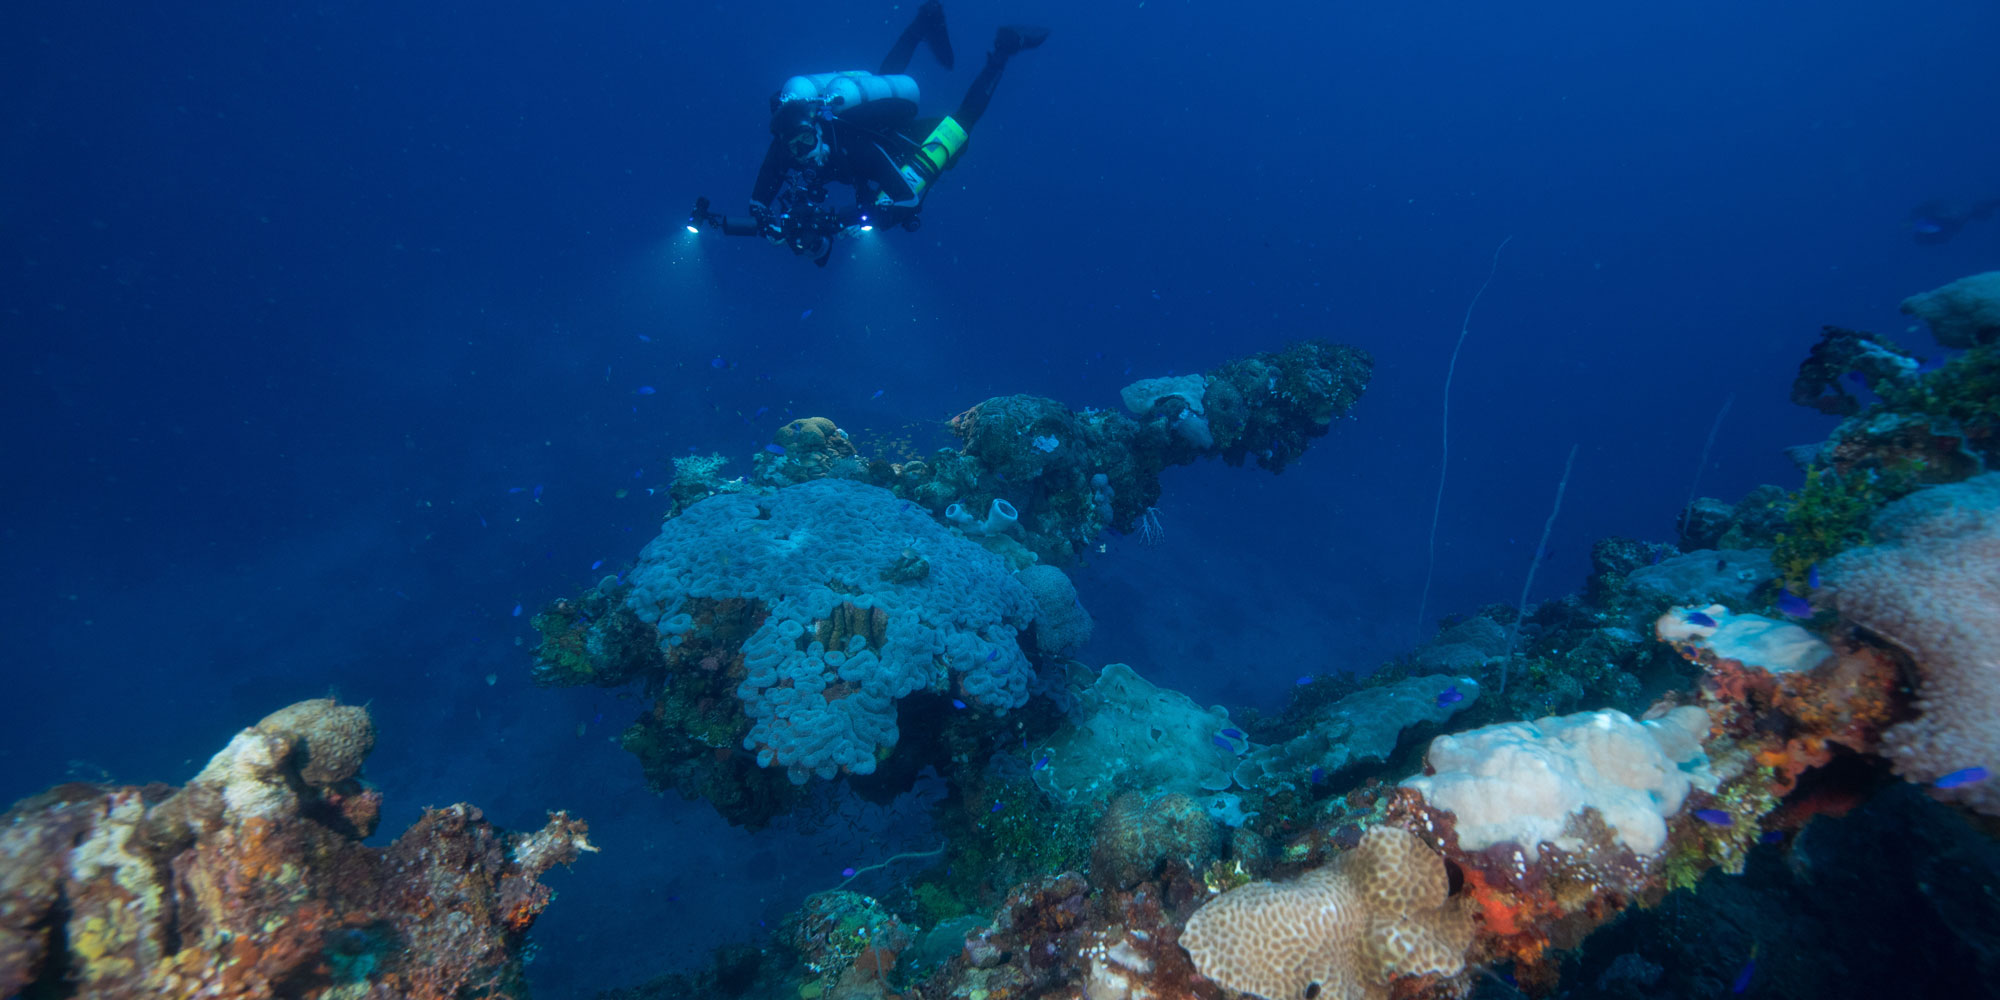 Wrecks are now artificial reefs but many still potentially contain thousands of litres of toxic fuel oil.